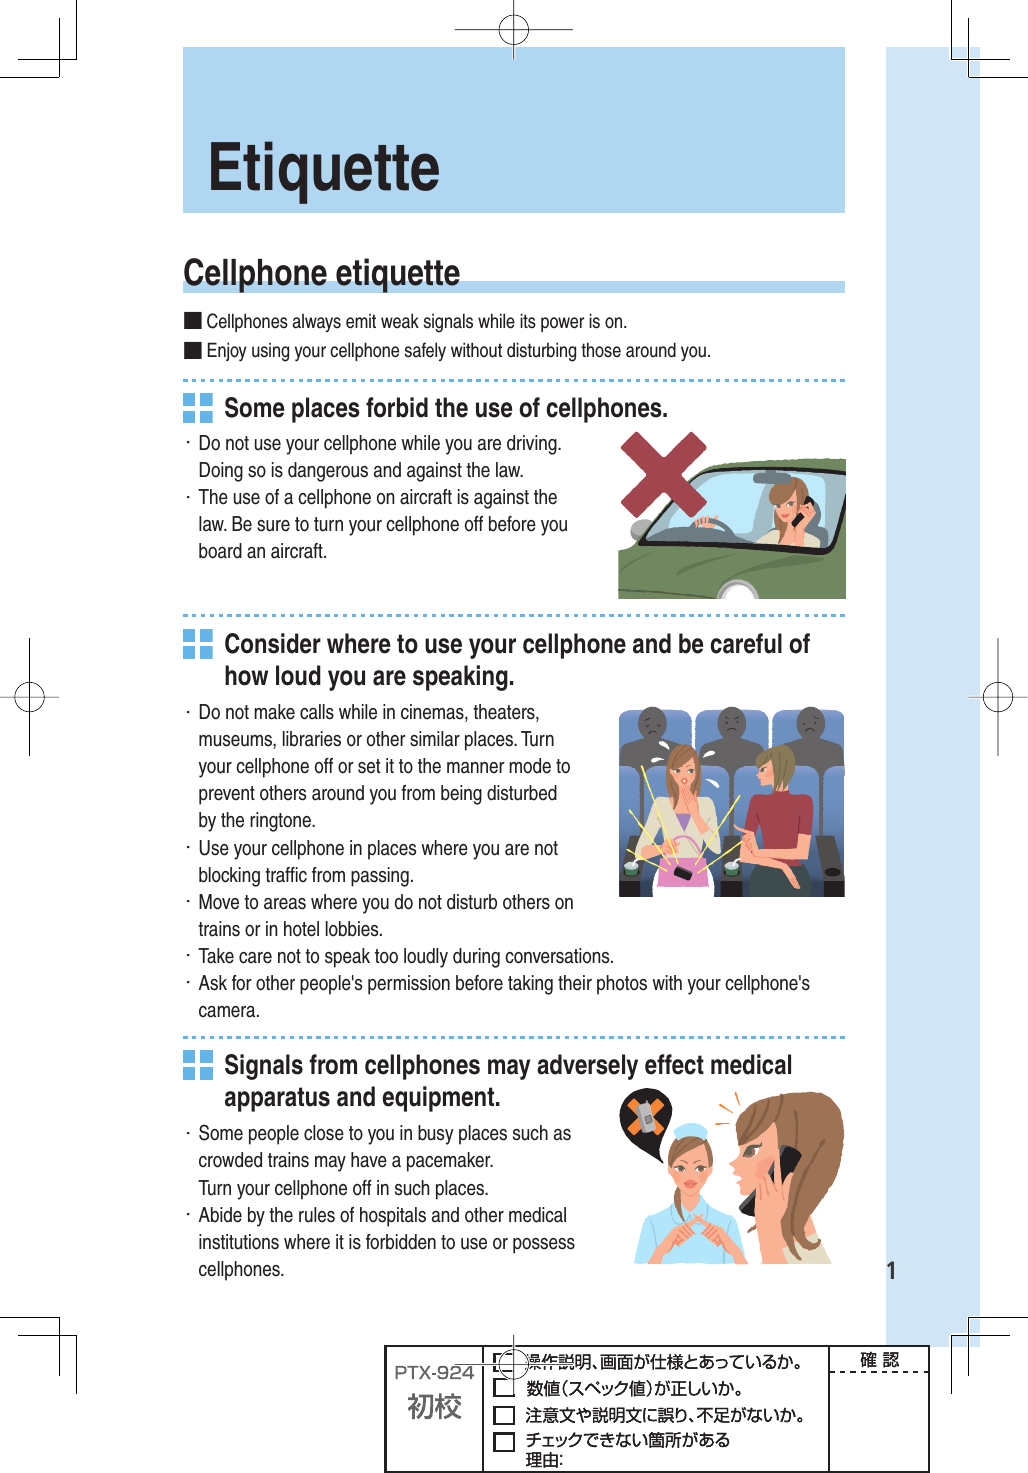 1Etiquette Cellphone  etiquette■ Cellphones always emit weak signals while its power is on.■ Enjoy using your cellphone safely without disturbing those around you.  Some places forbid the use of cellphones.・ Do not use your cellphone while you are driving. Doing so is dangerous and against the law.・ The use of a cellphone on aircraft is against the law. Be sure to turn your cellphone off before you board an aircraft.  Consider where to use your cellphone and be careful of how loud you are speaking.・ Do not make calls while in cinemas, theaters, museums, libraries or other similar places. Turn your cellphone off or set it to the manner mode to prevent others around you from being disturbed by the ringtone.・ Use your cellphone in places where you are not blocking trafﬁ c from passing.・ Move to areas where you do not disturb others on trains or in hotel lobbies.・ Take care not to speak too loudly during conversations.・ Ask for other people&apos;s permission before taking their photos with your cellphone&apos;s camera.  Signals from cellphones may adversely effect medical apparatus and equipment.・ Some people close to you in busy places such as crowded trains may have a pacemaker.Turn your cellphone off in such places.・ Abide by the rules of hospitals and other medical institutions where it is forbidden to use or possess cellphones.